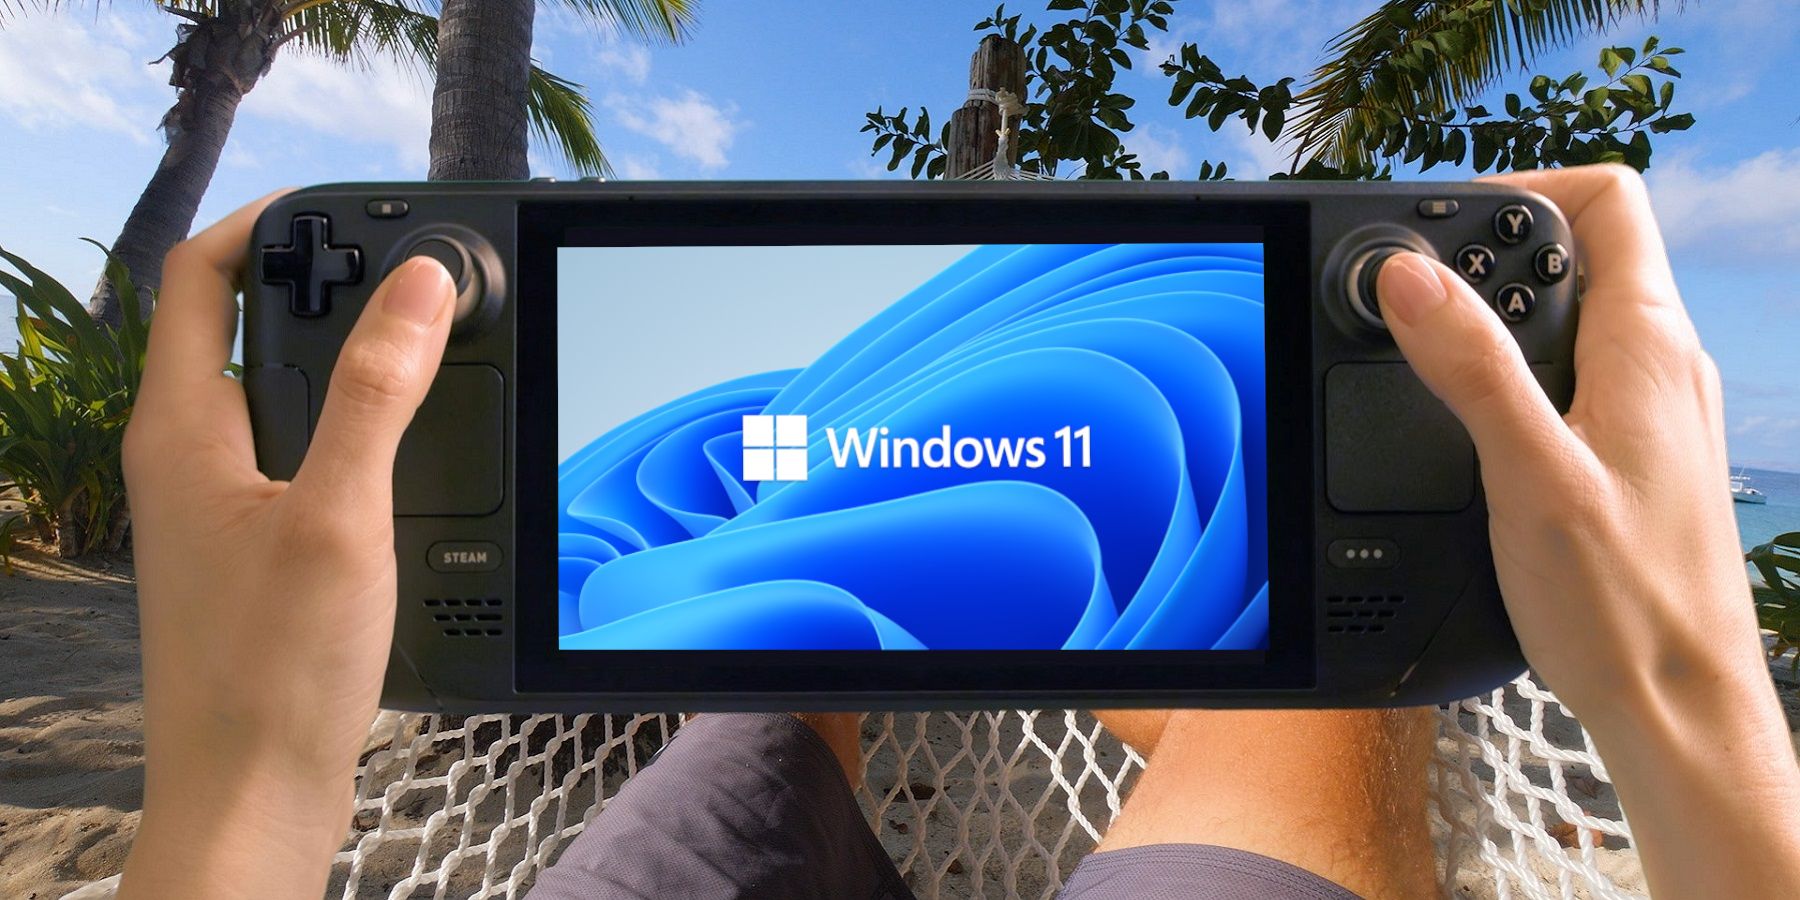 An image of someone holding a Steam Deck with the Windows 11 logo on the screen.